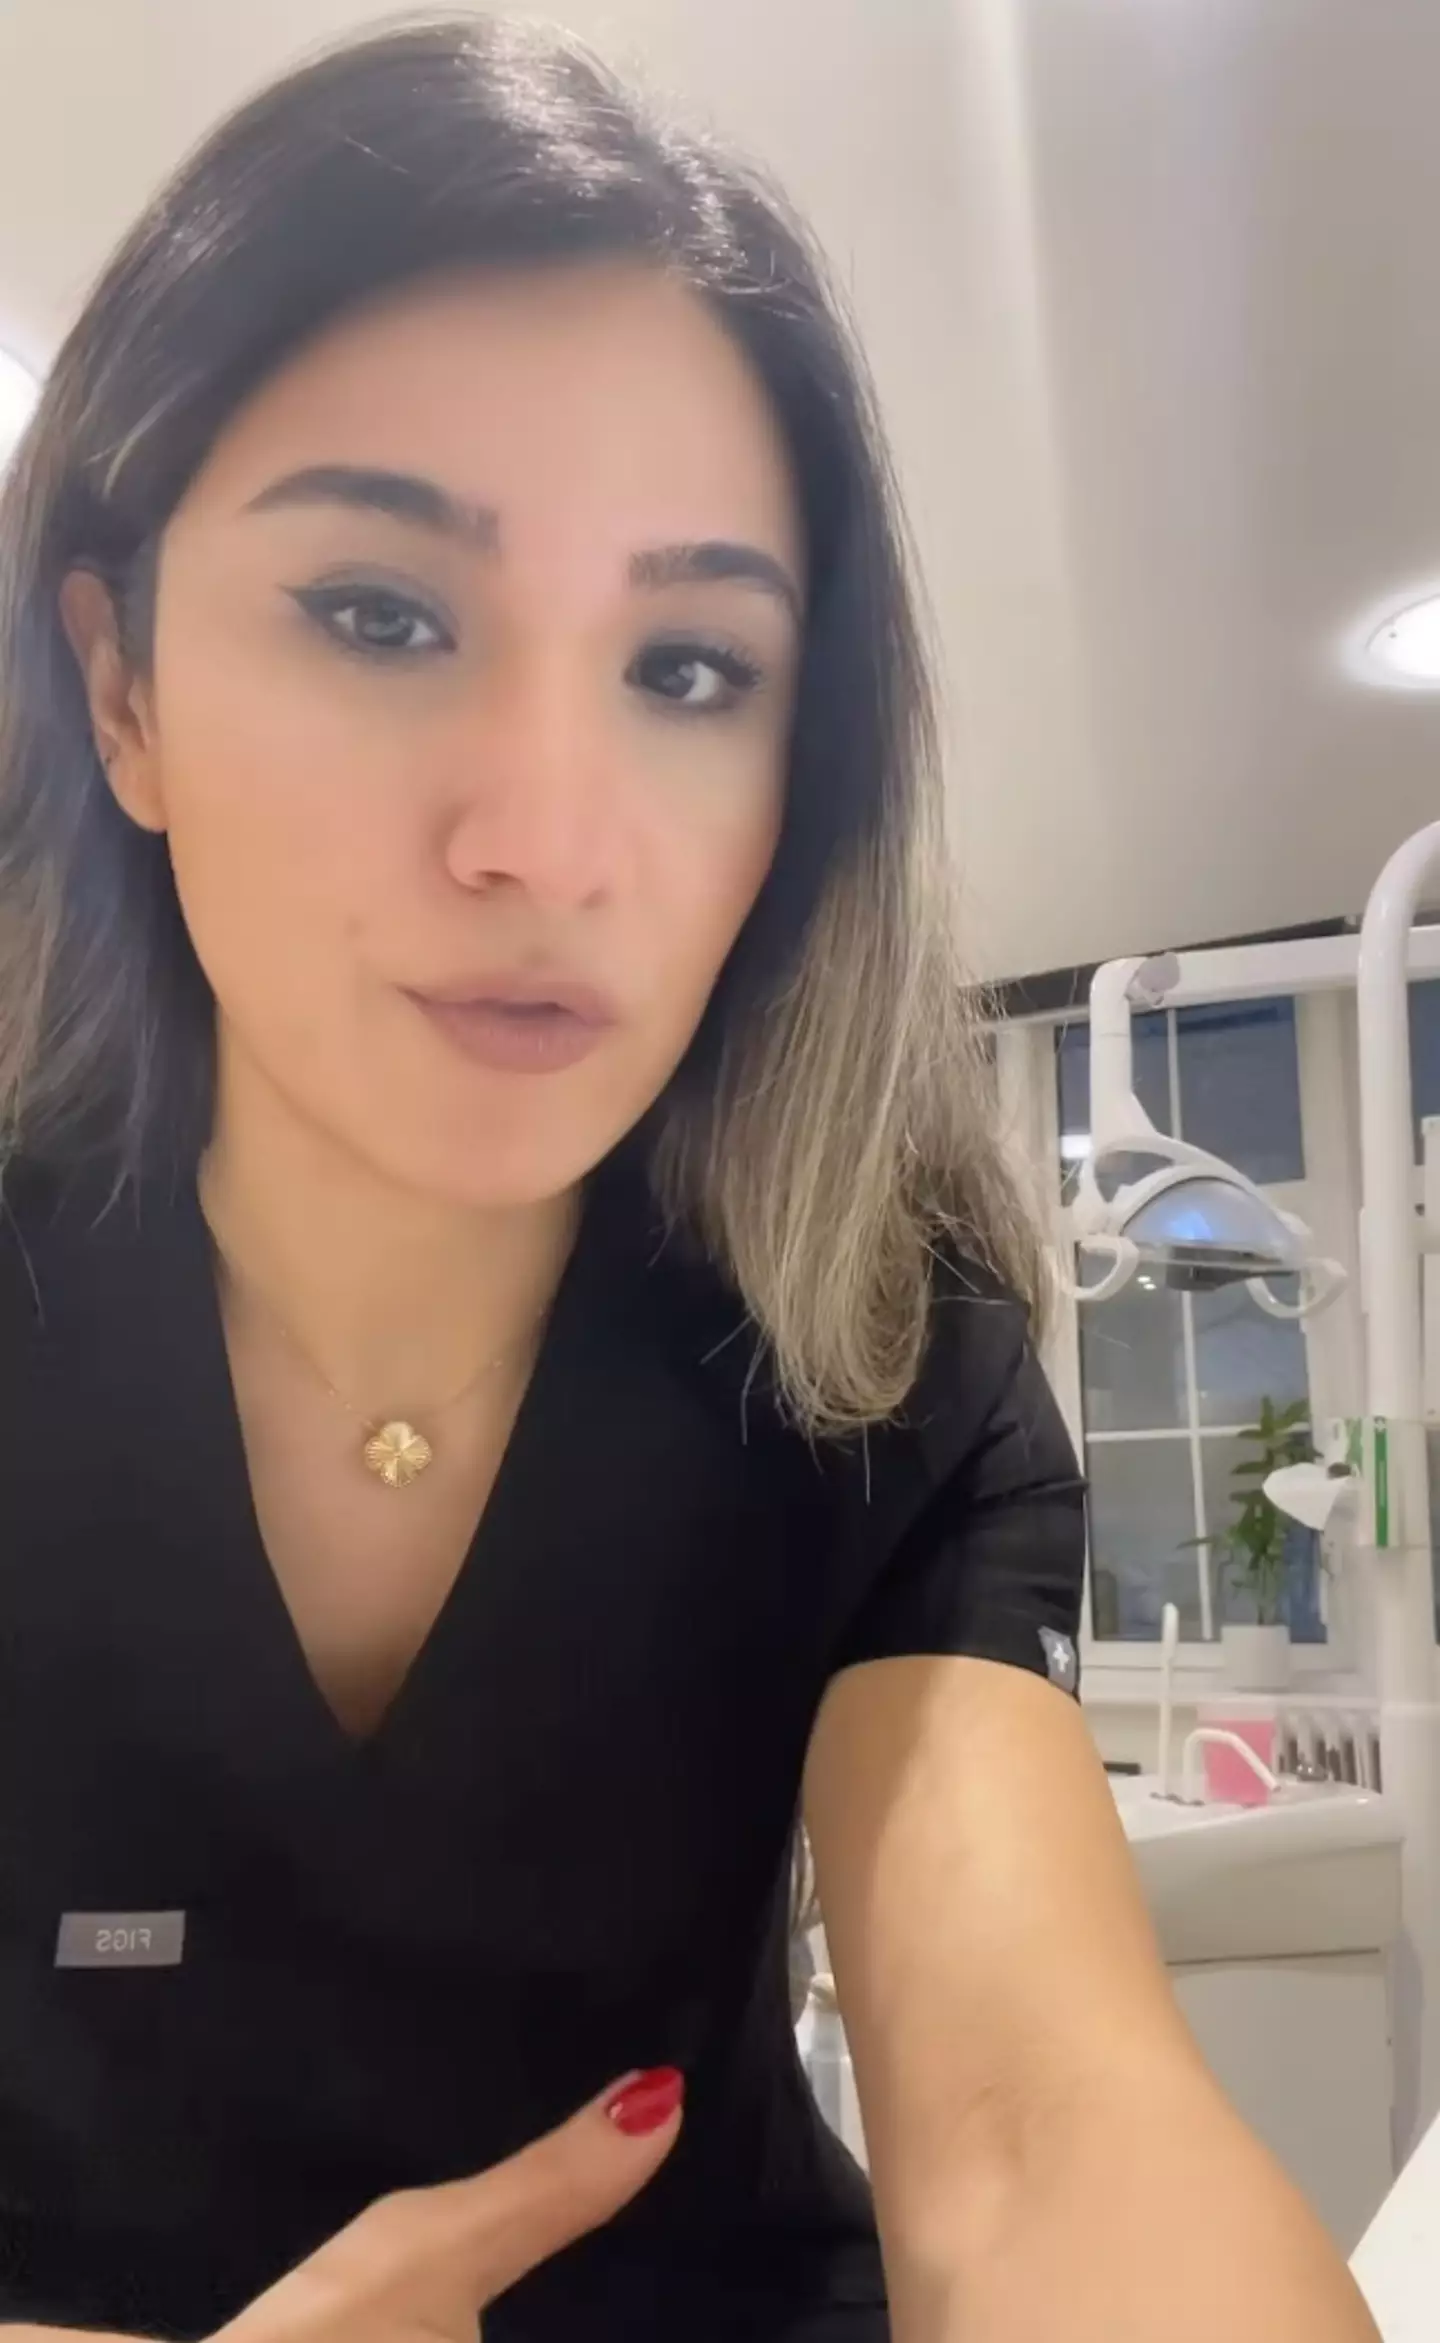 The dentist shared a video detailing her dental advice.